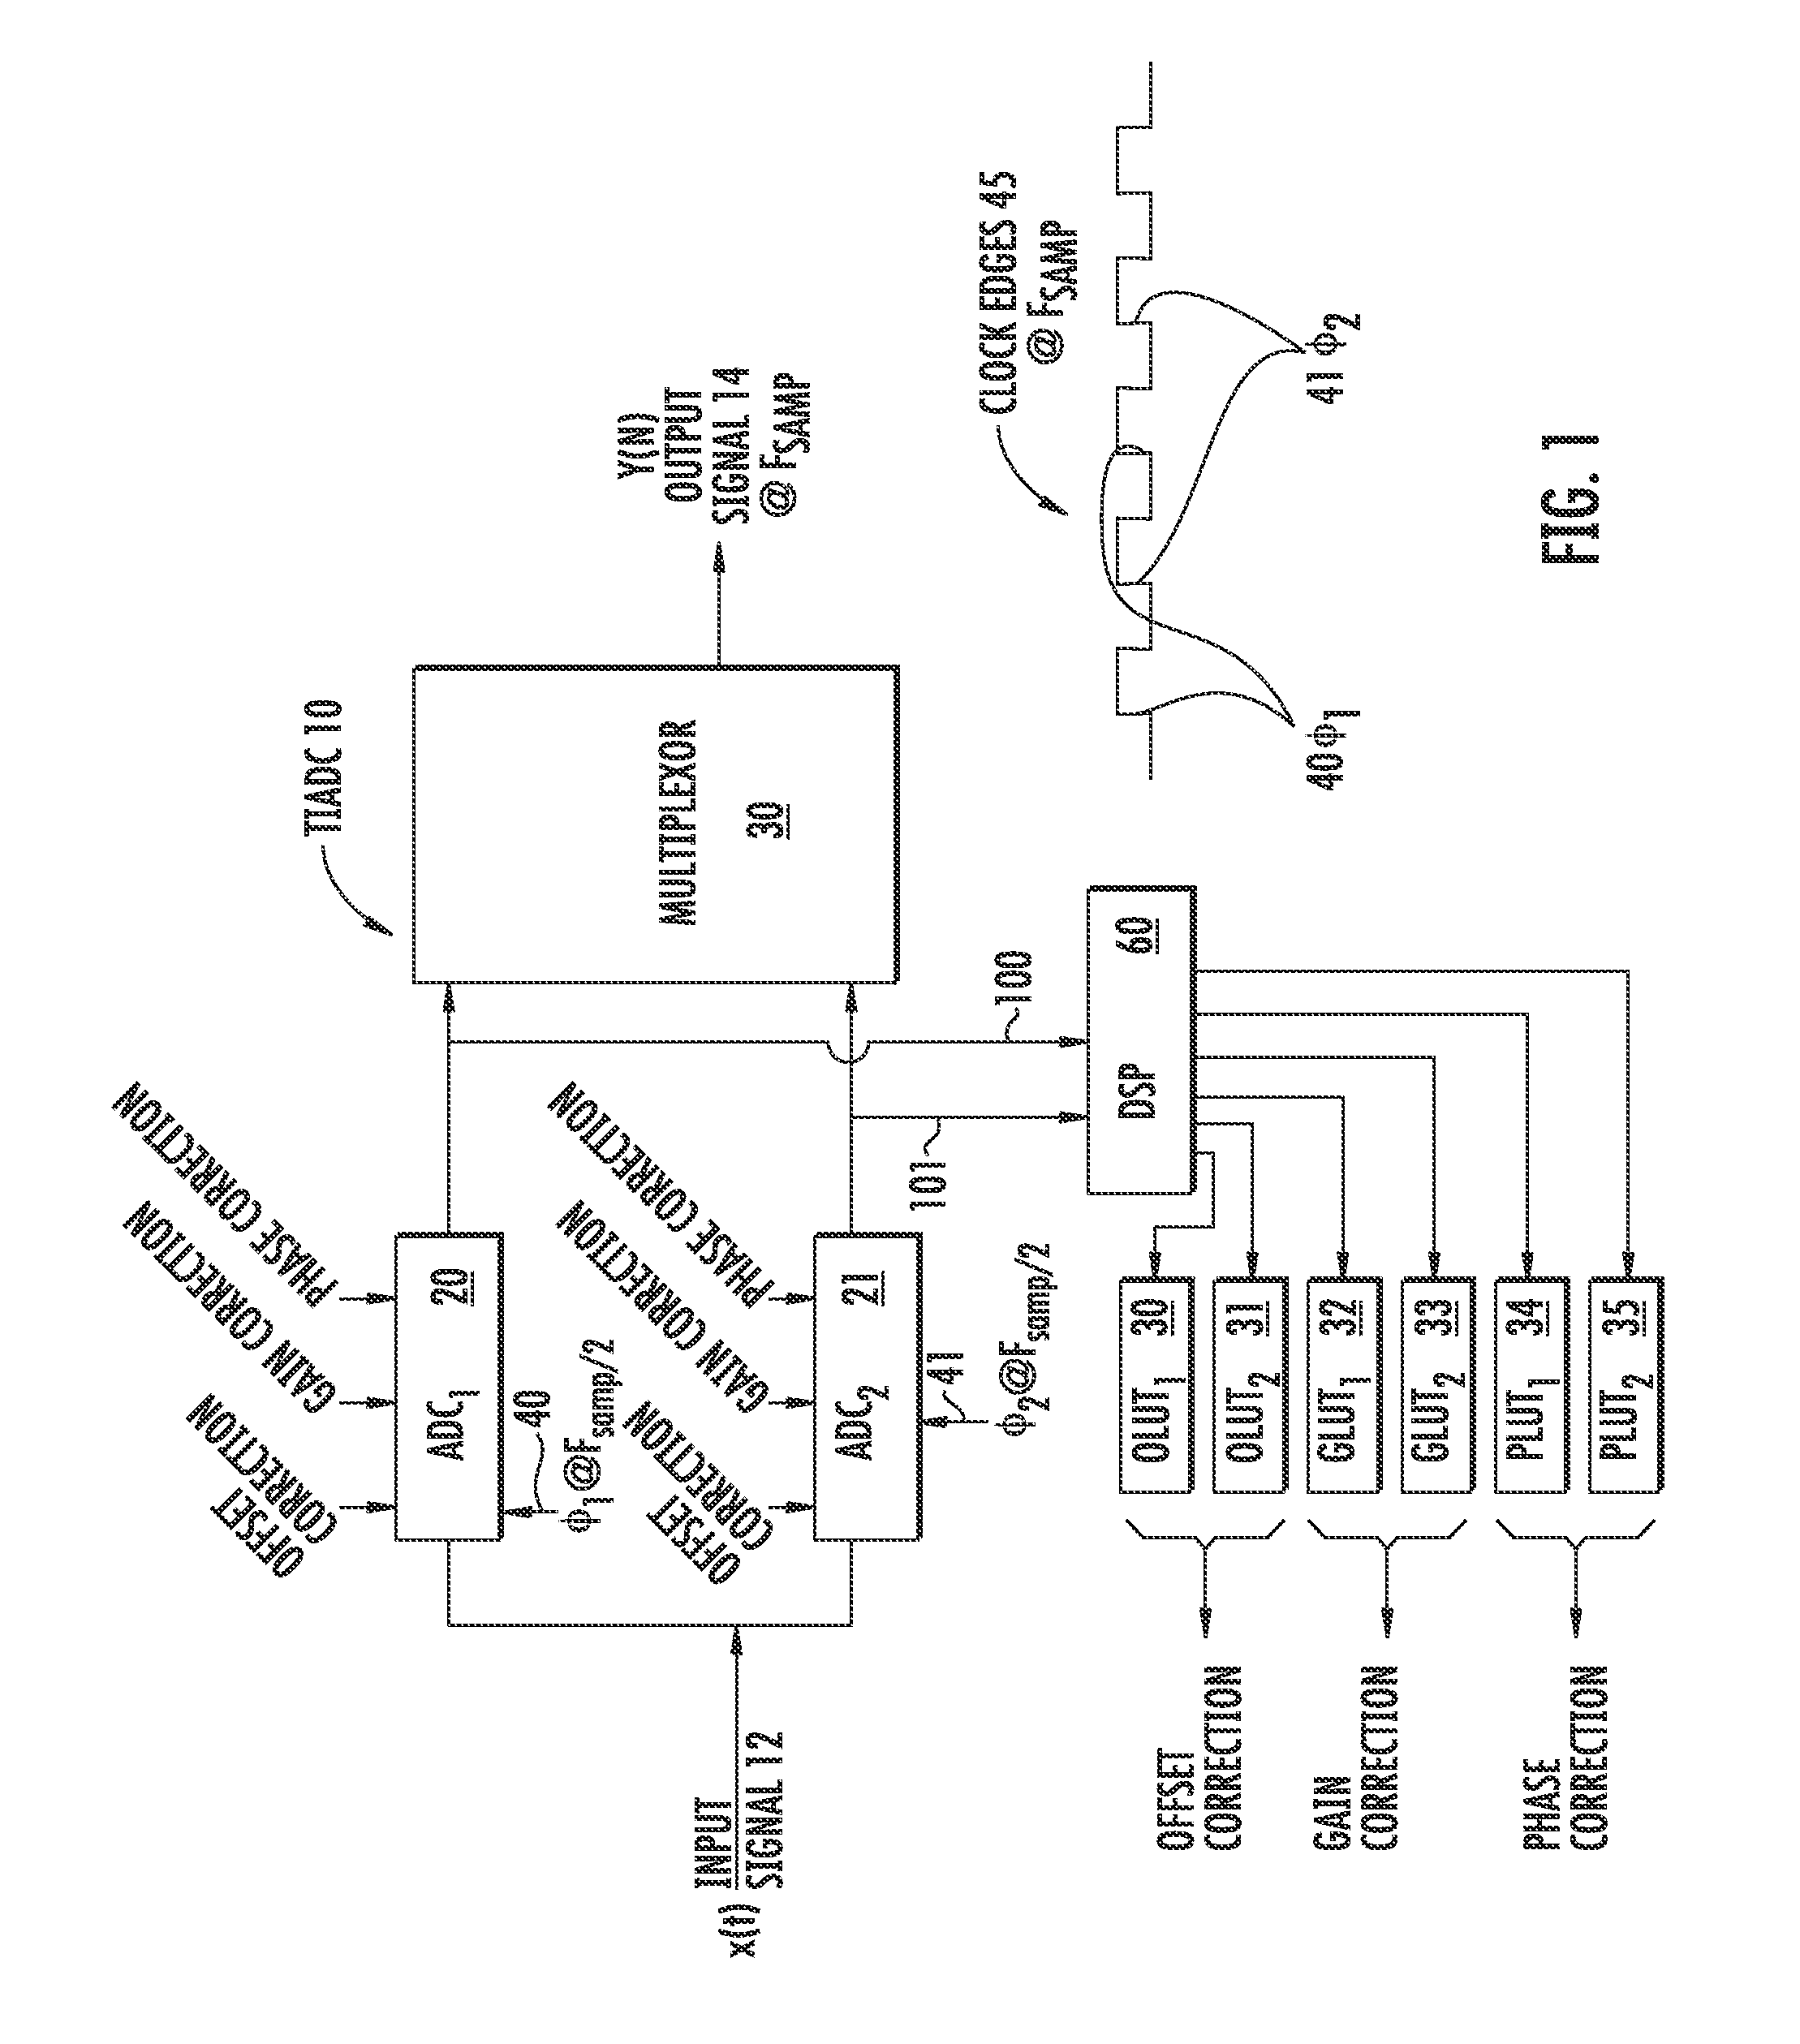 Error estimation and correction in a two-channel time-interleaved analog-to-digital converter